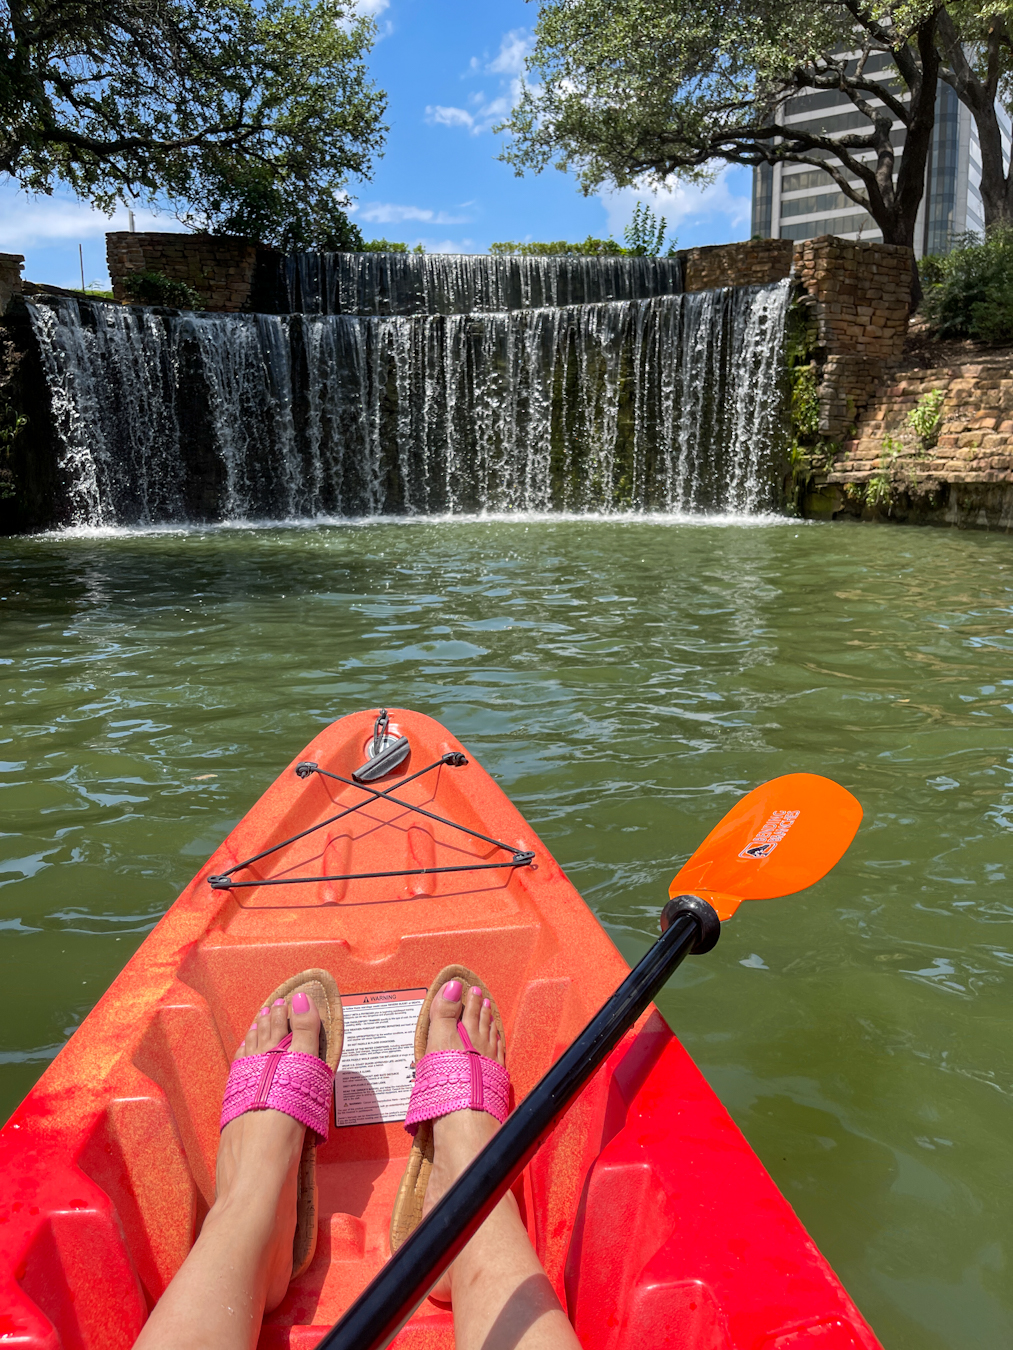 Kayaking in Dallas for the First Time